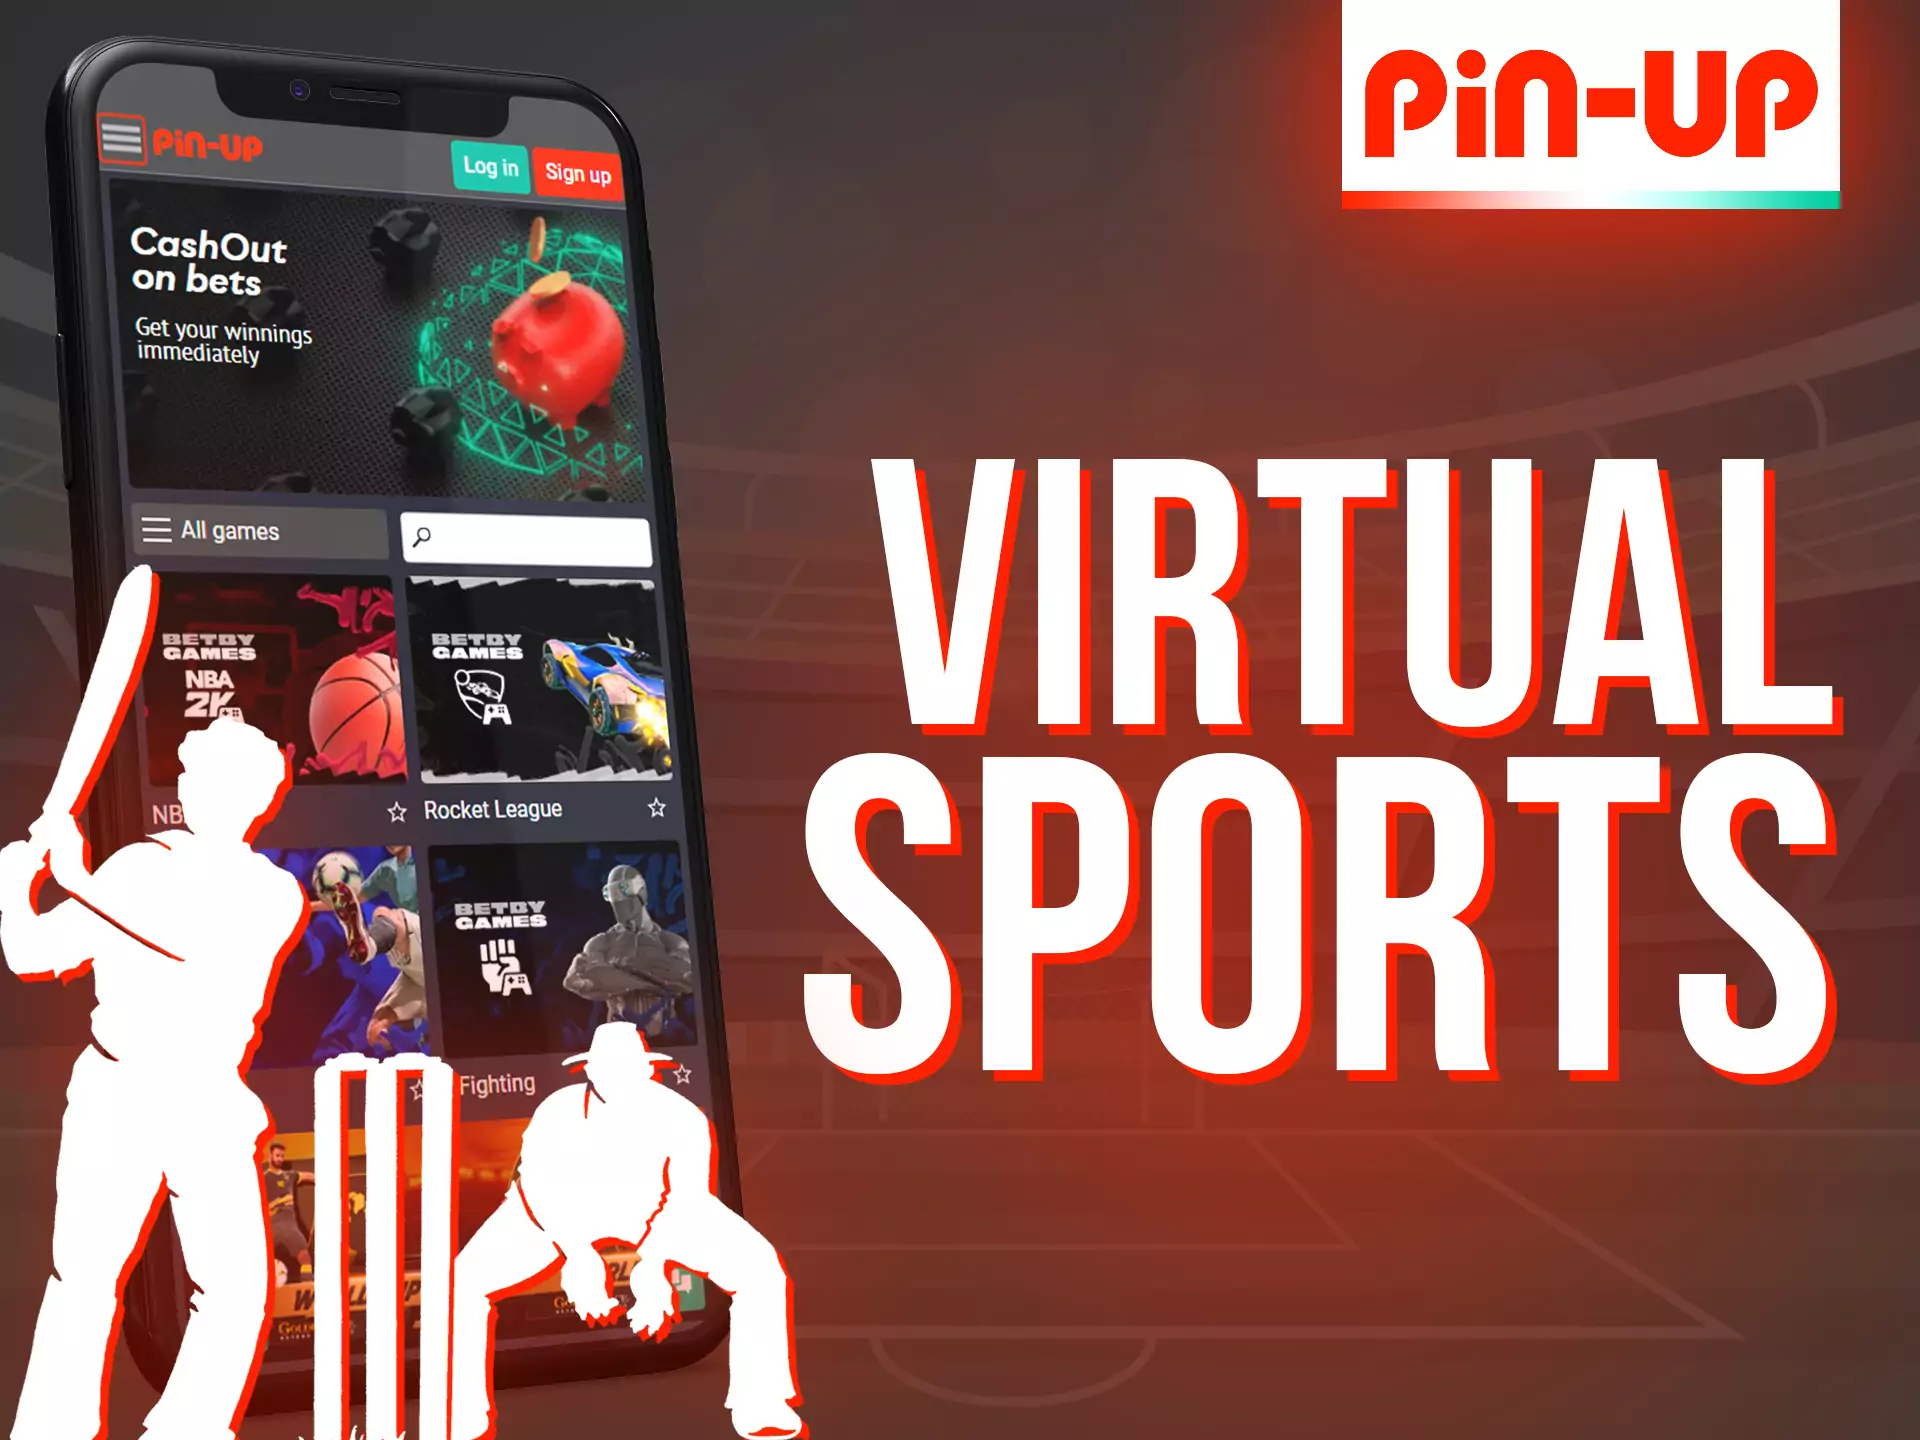 Place your bets on virtual sports on the Pin-Up app.